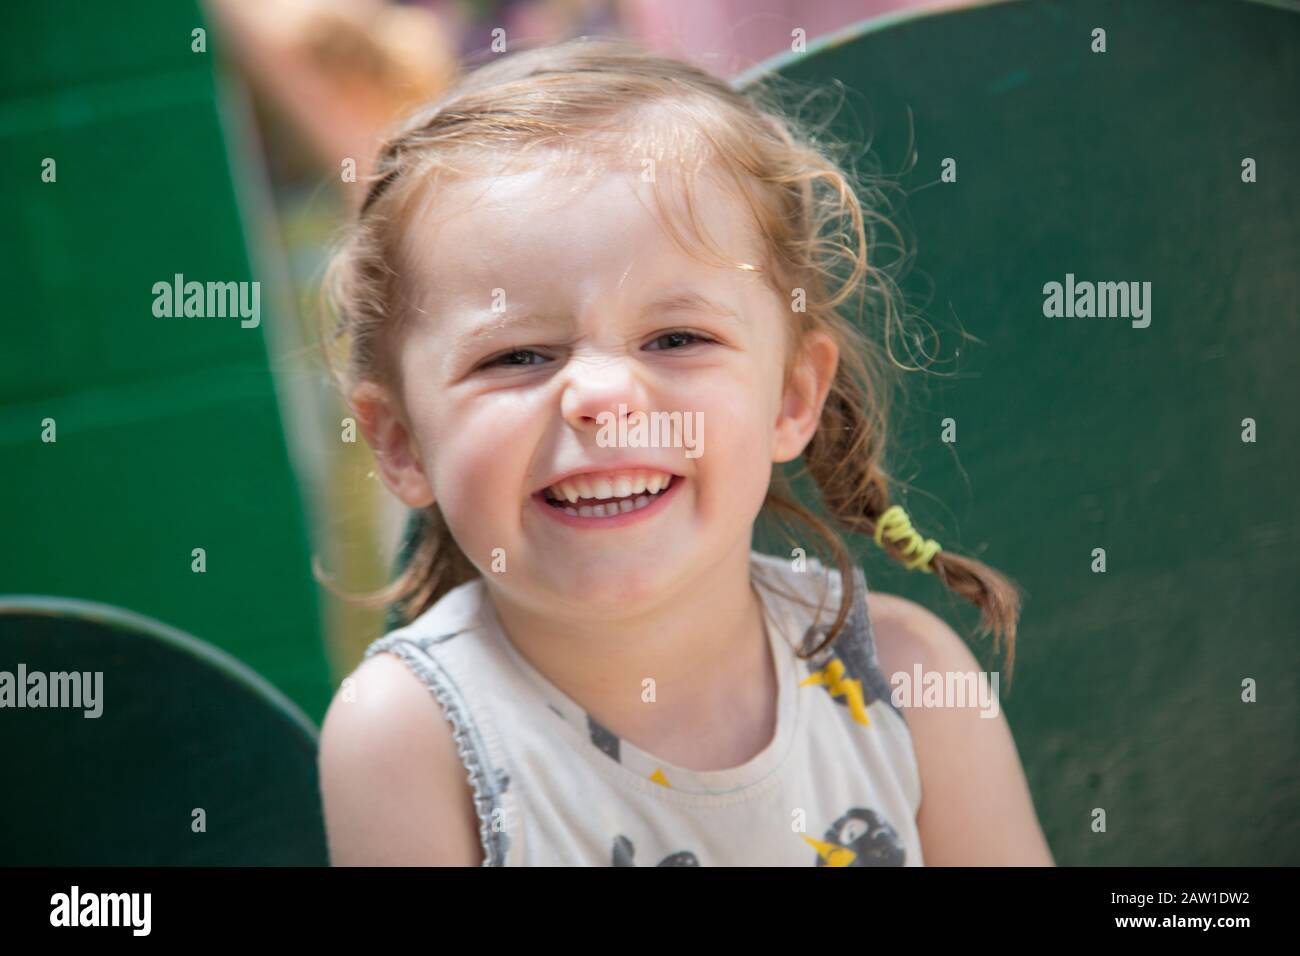 A young toddler girl in a summer dress and pigtails. Stock Photo